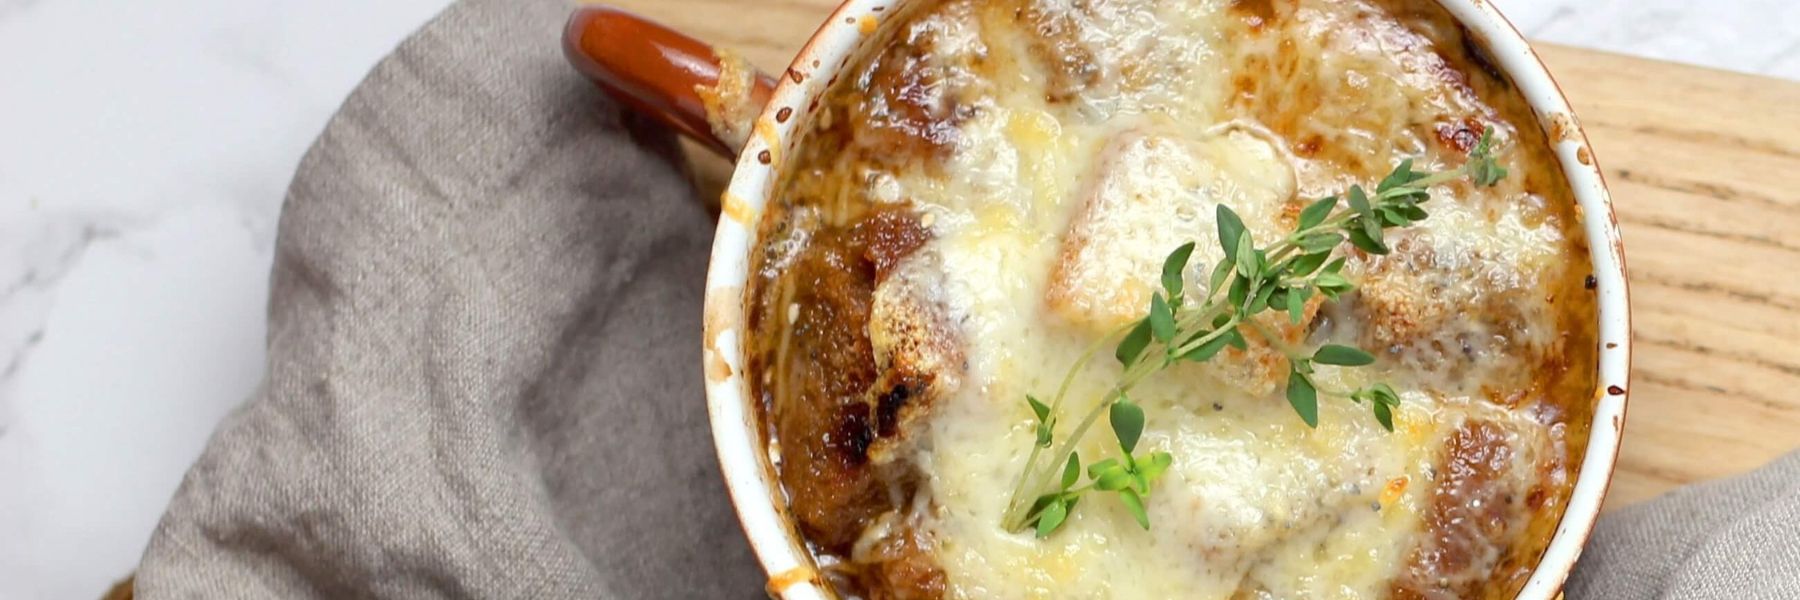 French onion soup is one of the comfort foods that will keep you warm throughout winter in St. Louis.